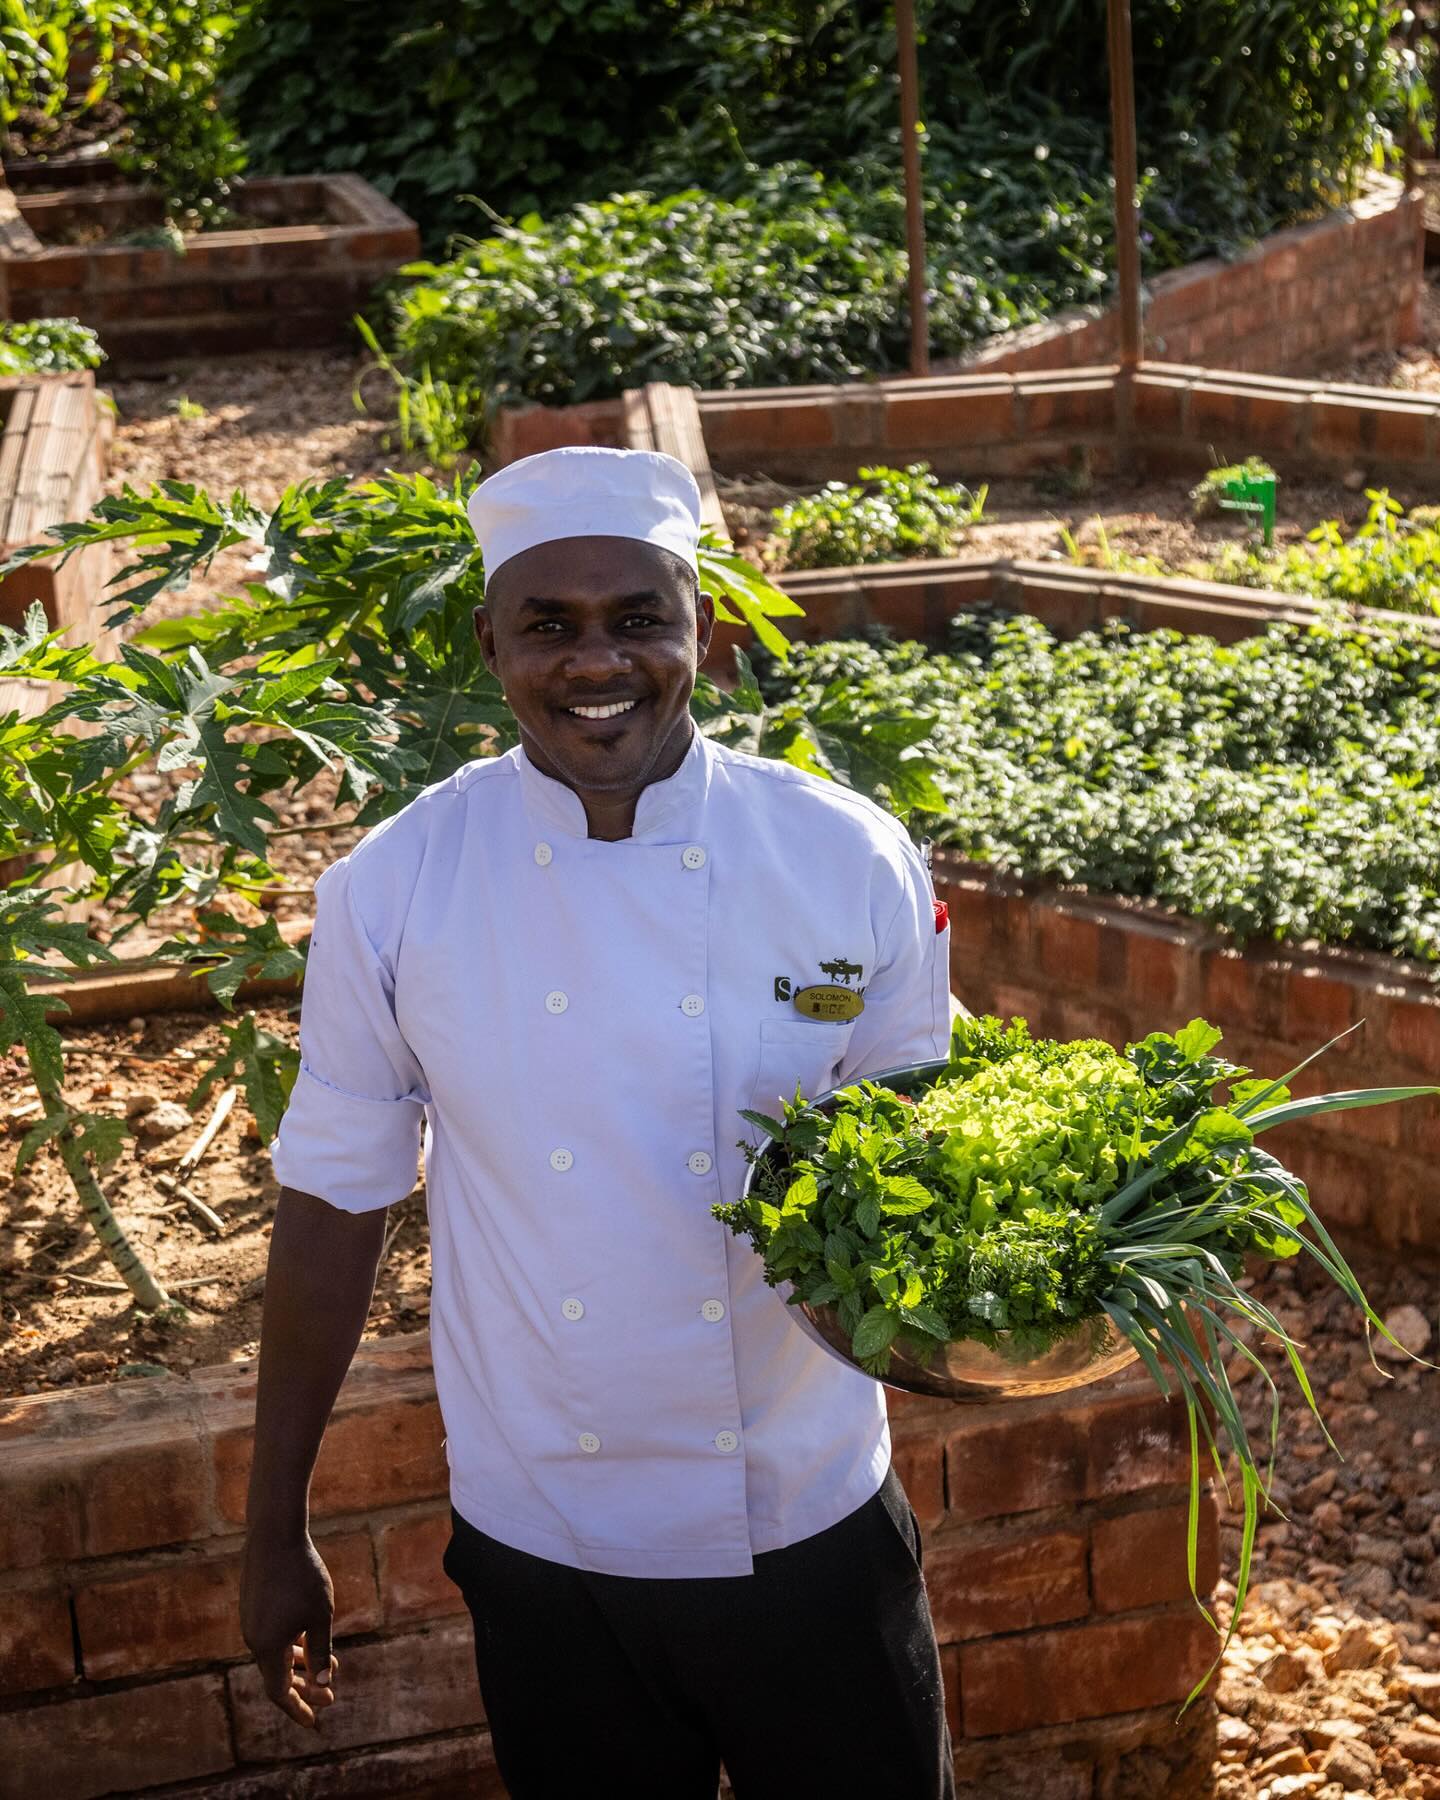 The true essence of farm-to-table dining at Sasaab 🌿

Our dedicated team thrives in the challenges of the arid Samburu landscape, cultivating a lush garden that defies the harsh climate. From local goats and cattle manure to help grow an array of organic vegetables to eggs from our chickens, we ensure every meal is a celebration of sustainability and freshness. 

#DiscoverTheSafariCollection #WelcomeToKenya #TheSafariCollection #OnSafari #Safari #Sasaab #SafariActivities #Samburu #FarmToTable #Shamba #Garden #Sustainability